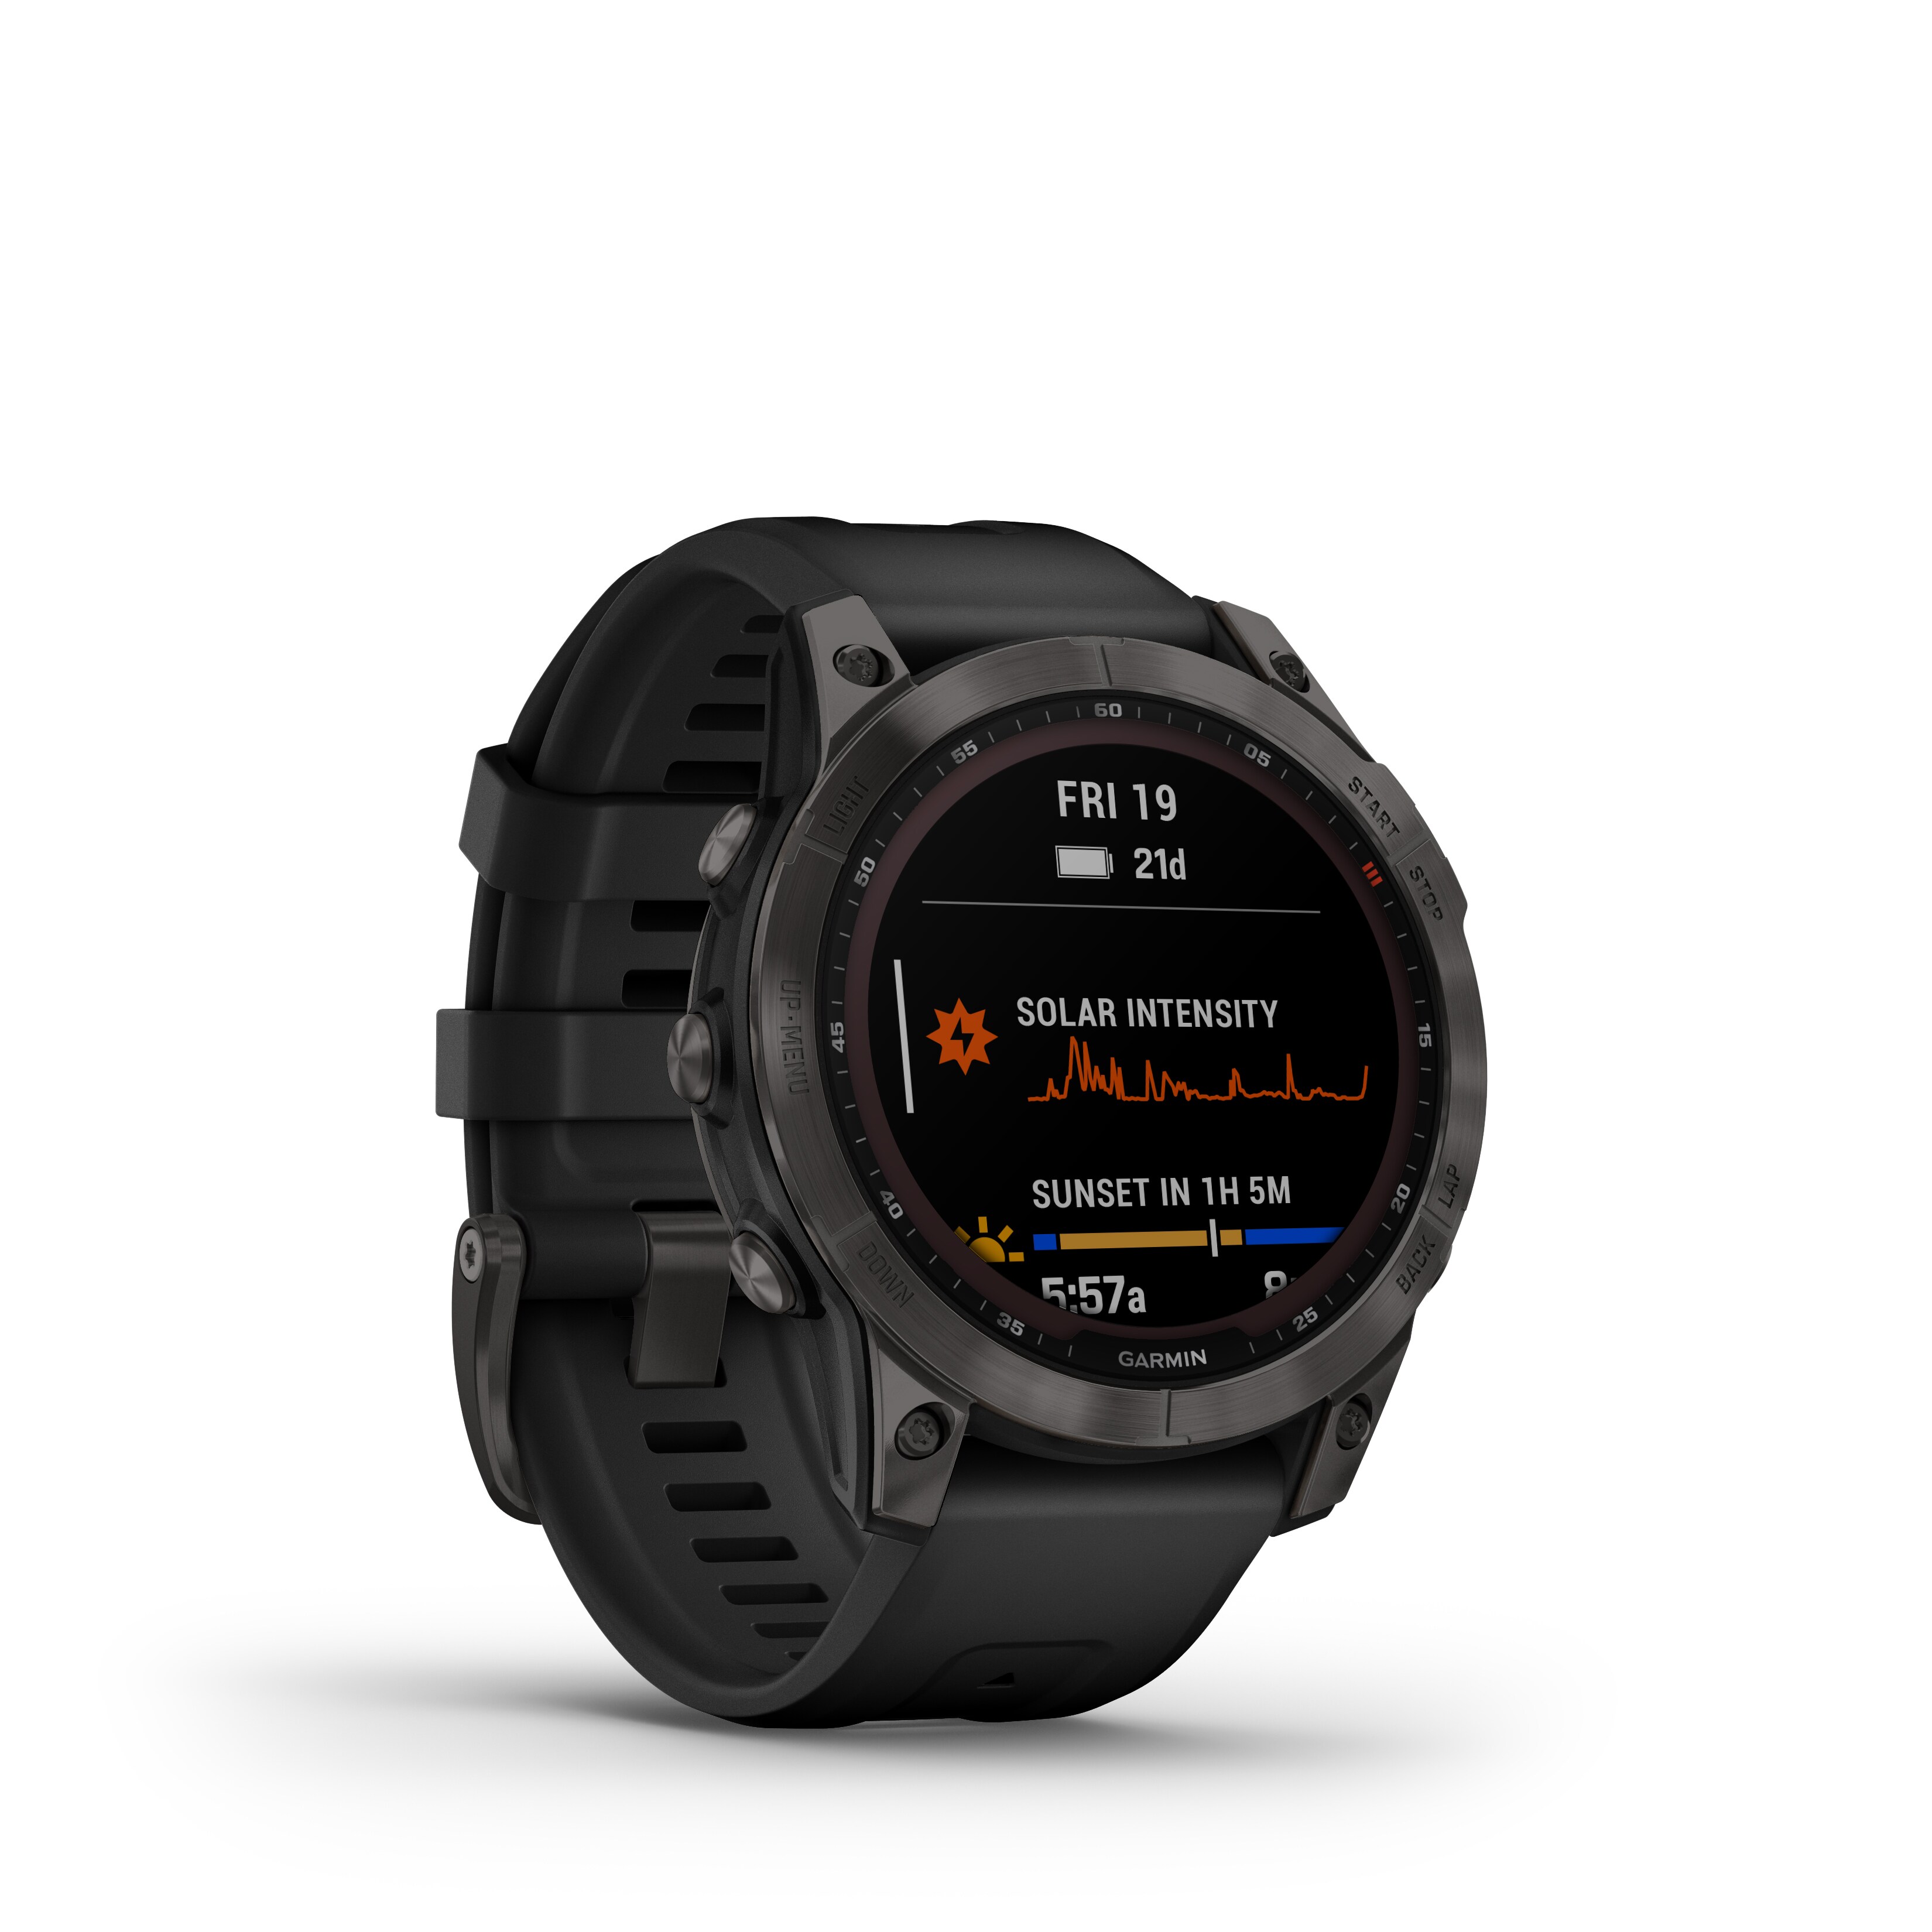 Slashes Prices on Garmin Fenix 5 Smartwatches for Father's Day